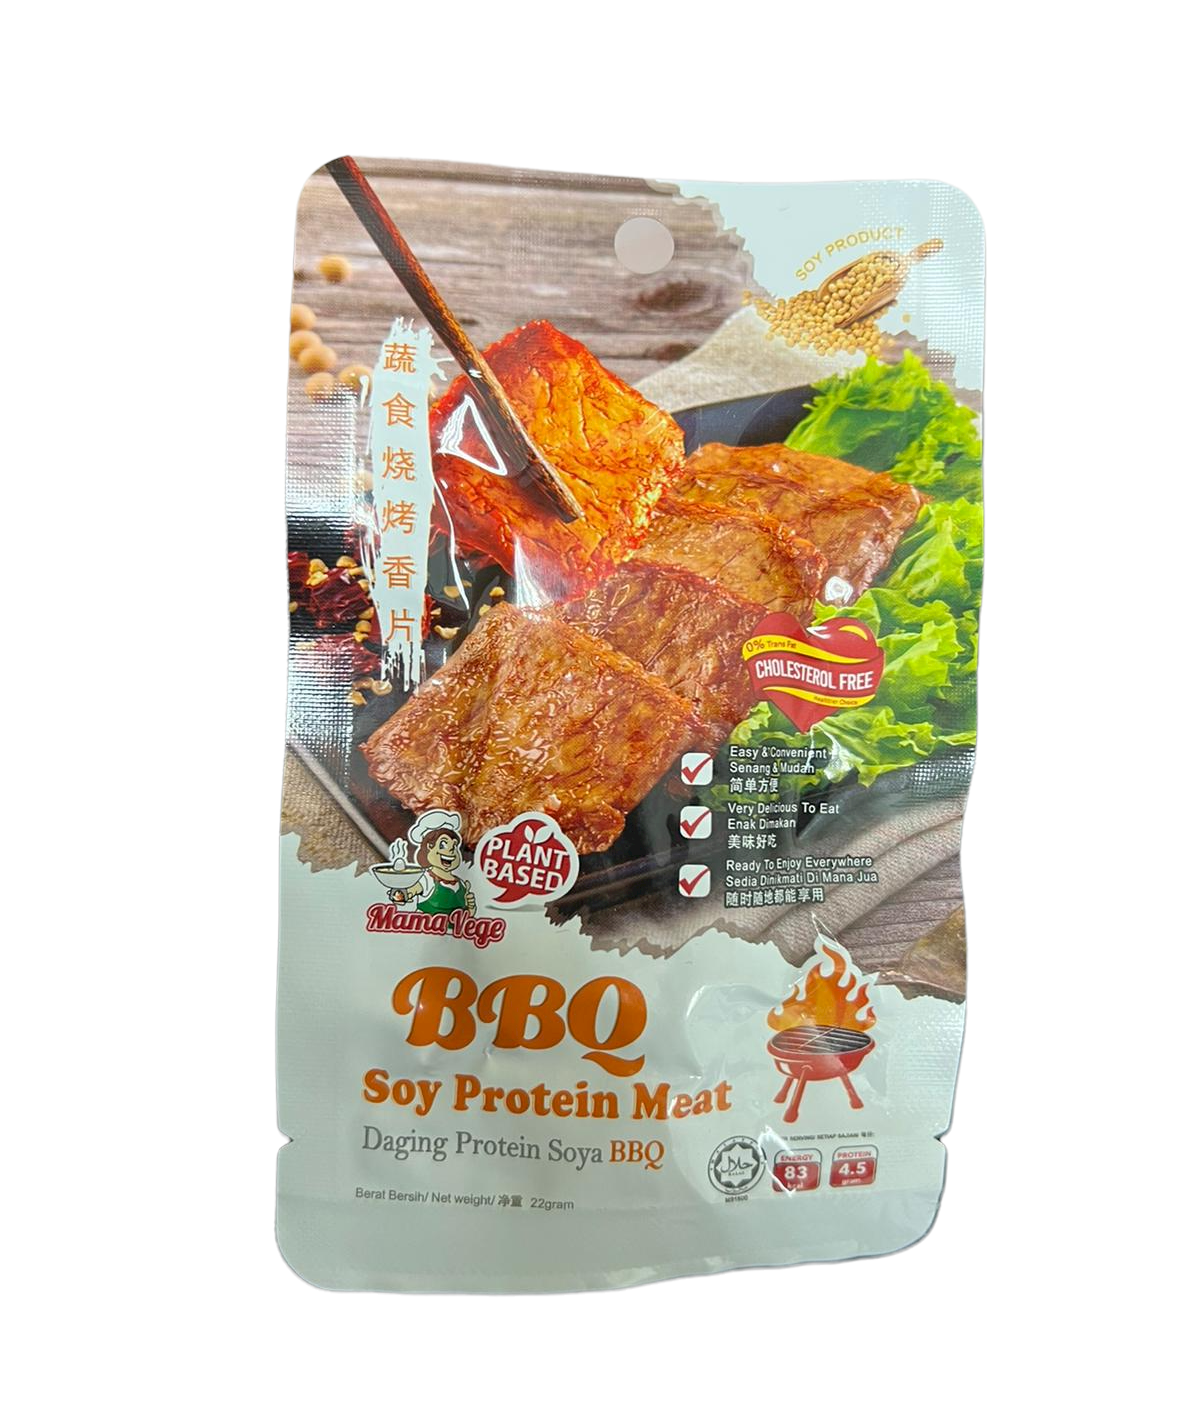 Image MAMA Soy Protein Meat 蔬食烧烤香片 22grams